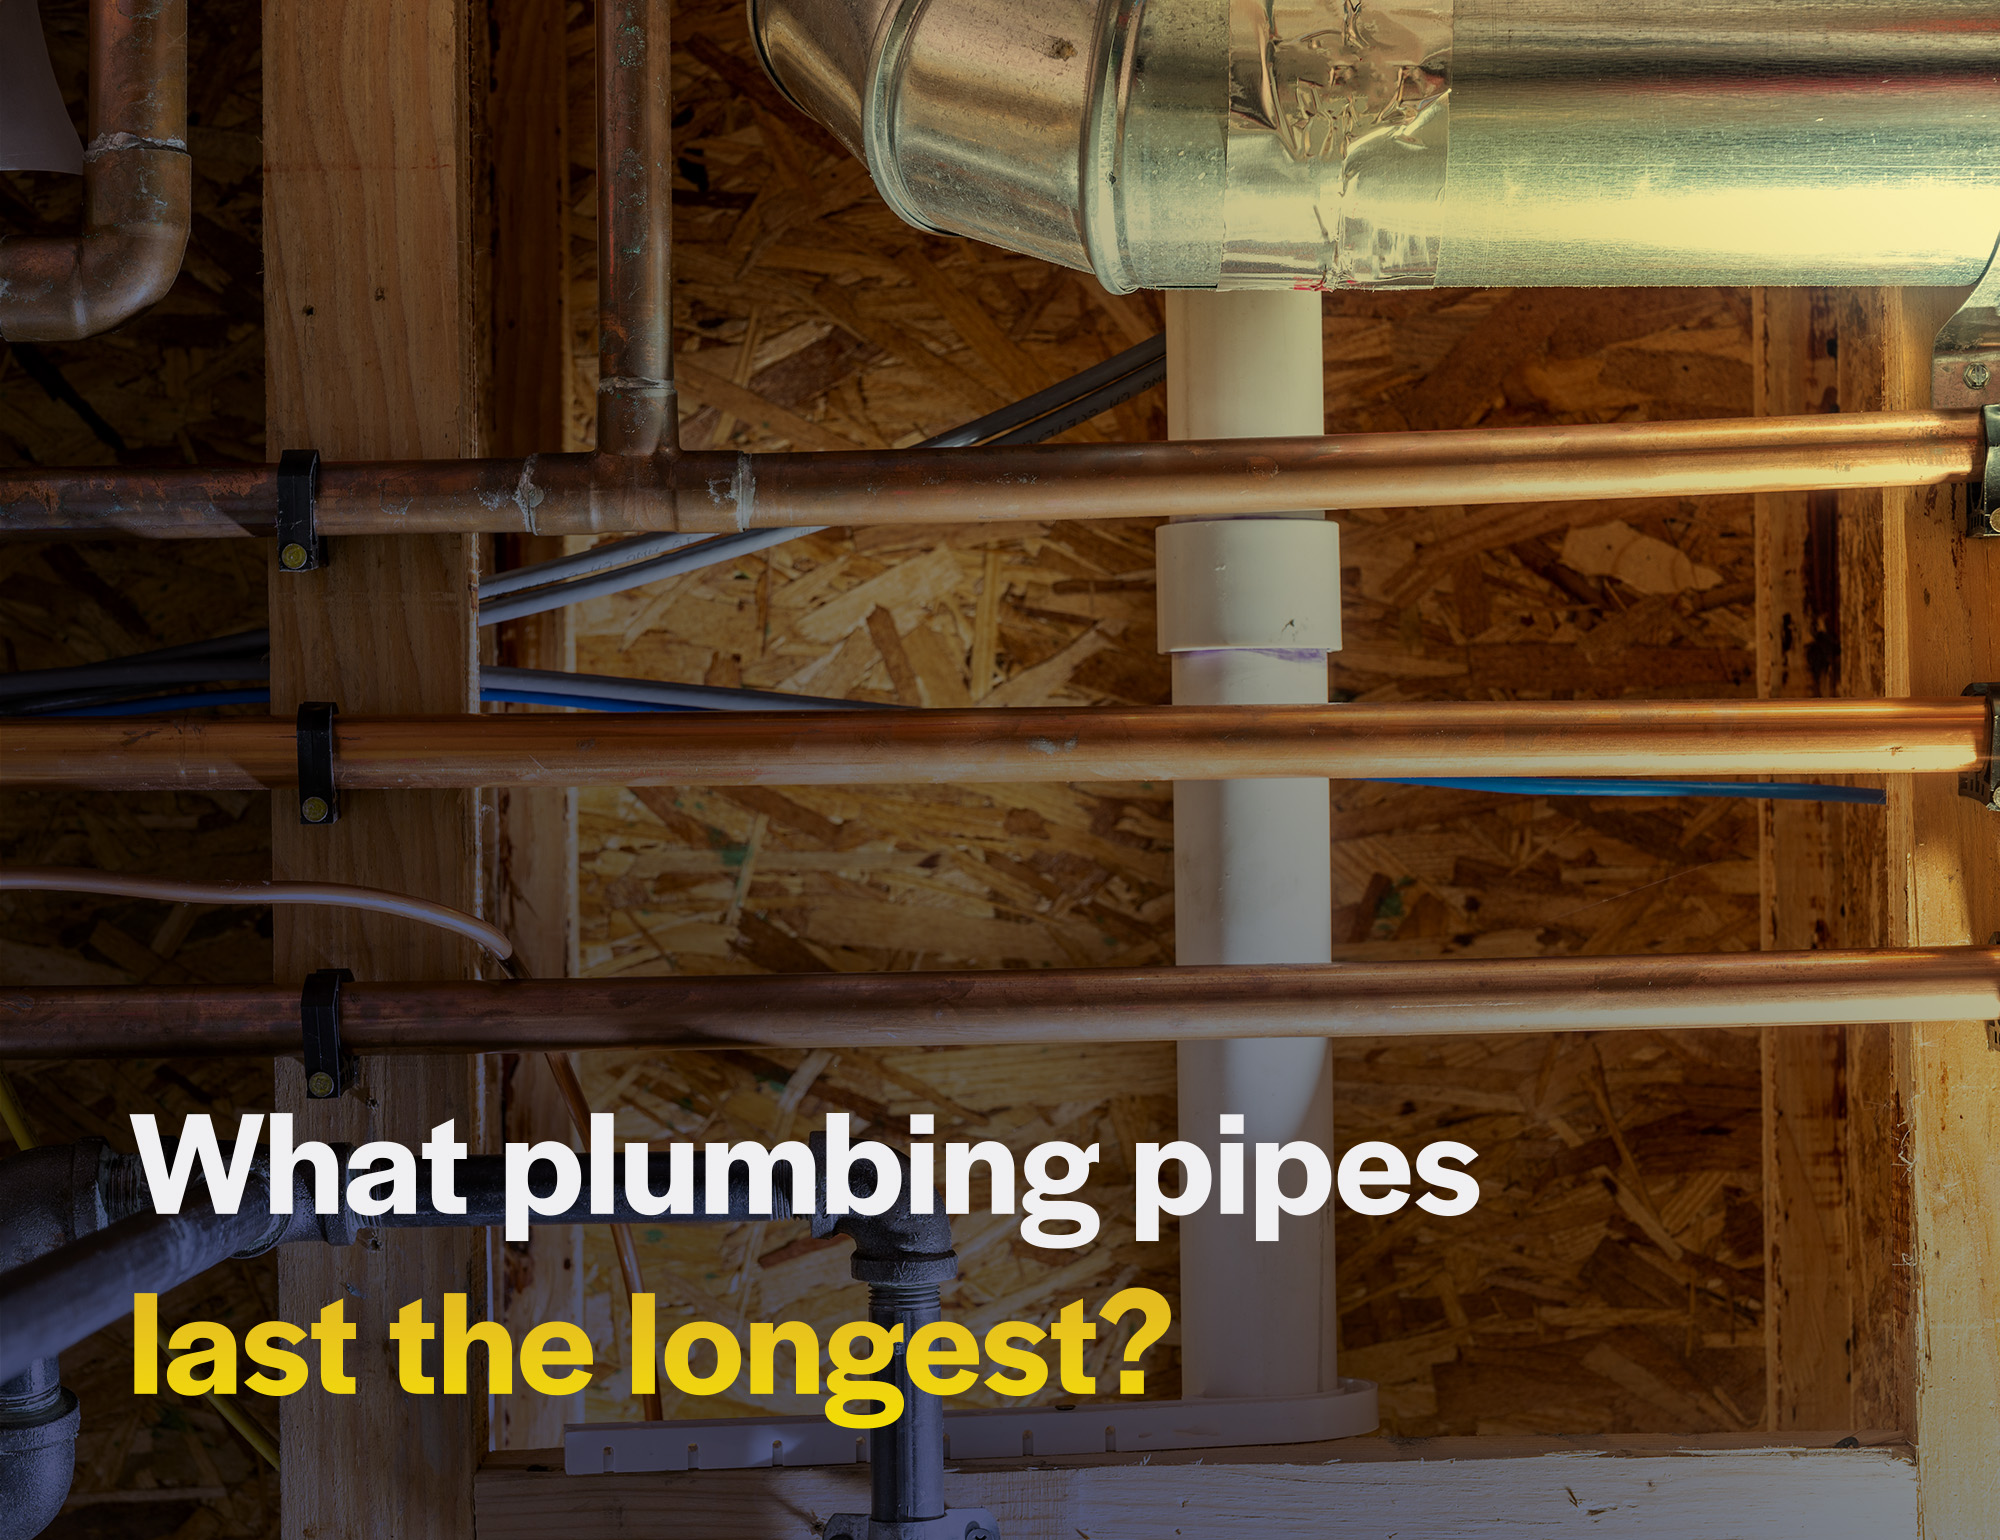 What plumbing pipes last the longest